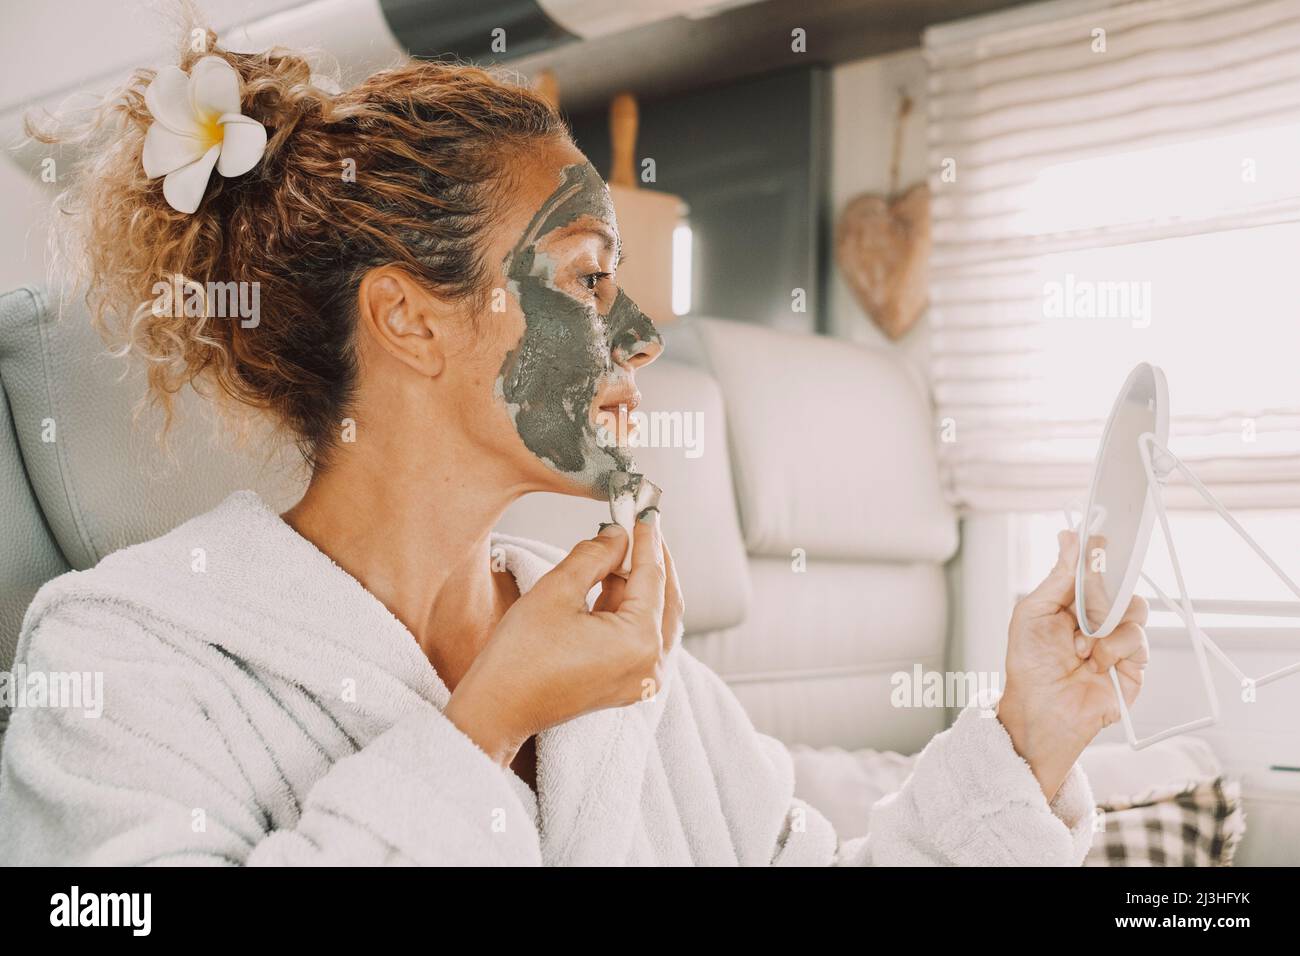 Woman applying face mask, anti-ageing skin treatment, mirror, care, beauty, lifestyle, close up, portrait, sideways Stock Photo